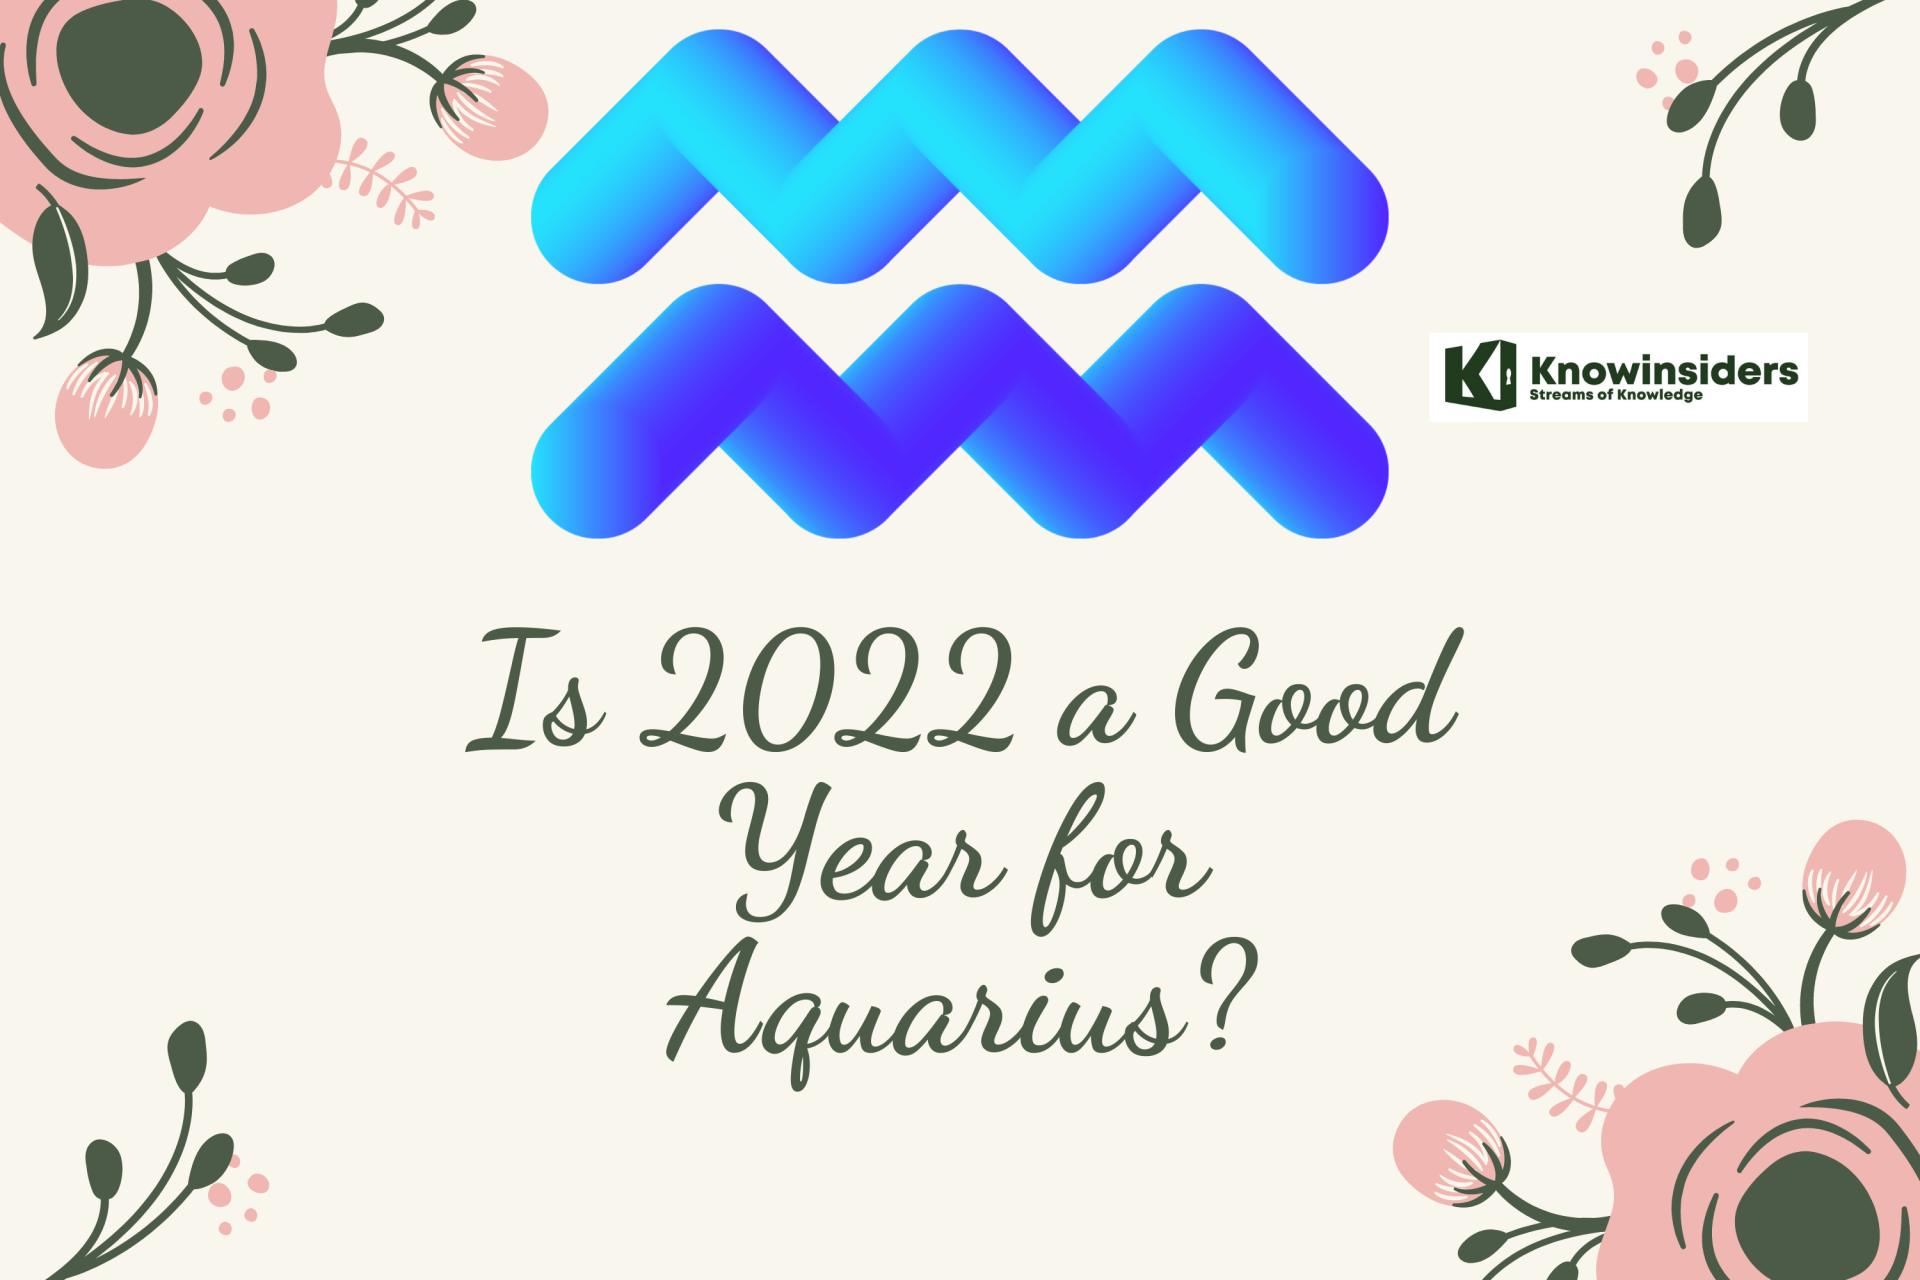 AQUARIUS March 2022 Horoscope: Monthly Prediction for Love, Career, Money and Health